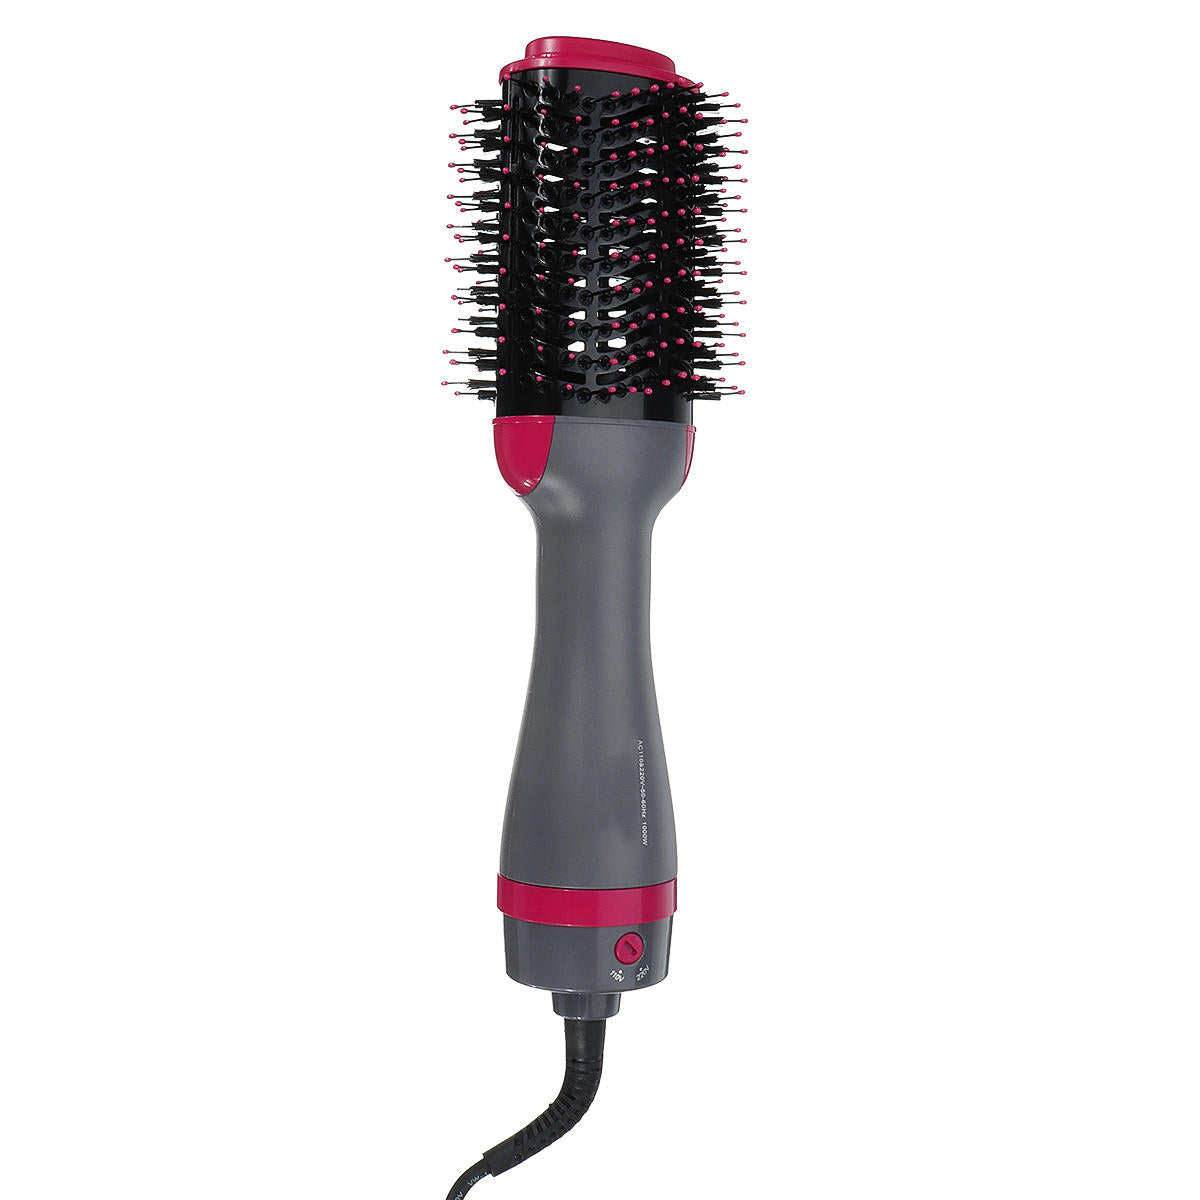 110V / 220V 2 In 1 1000W Hair Dryer Blower Brush Comb Volumizer Straightening Curling Smoothing Comb Hair Drying Styling Tool